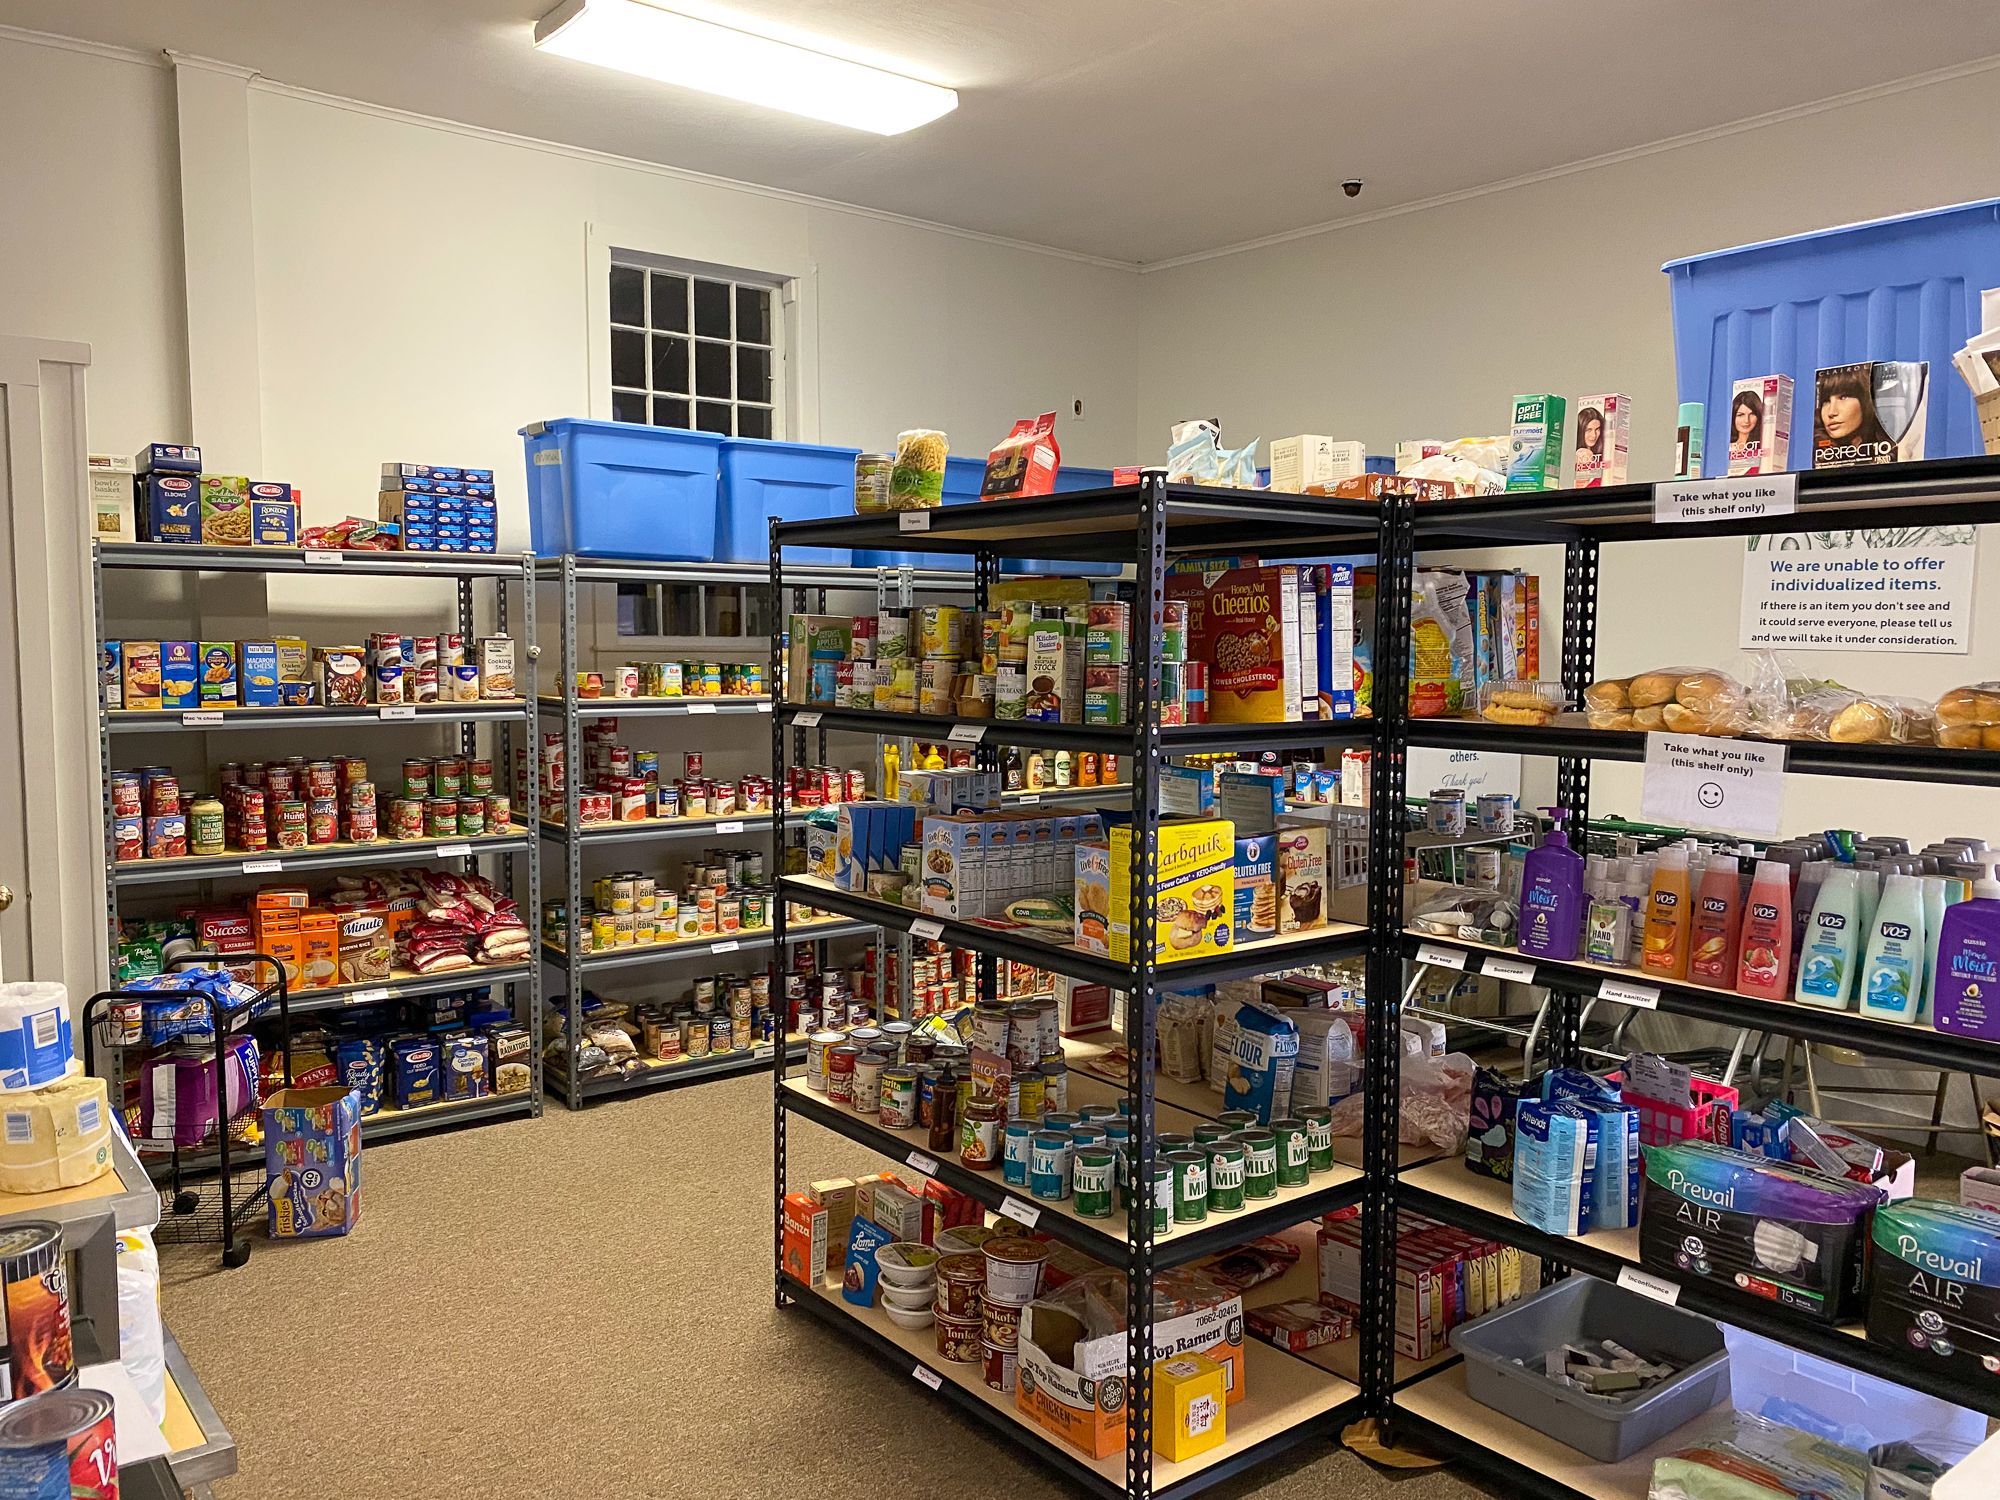 Town of Killingworth - Helping Hands Food Pantry